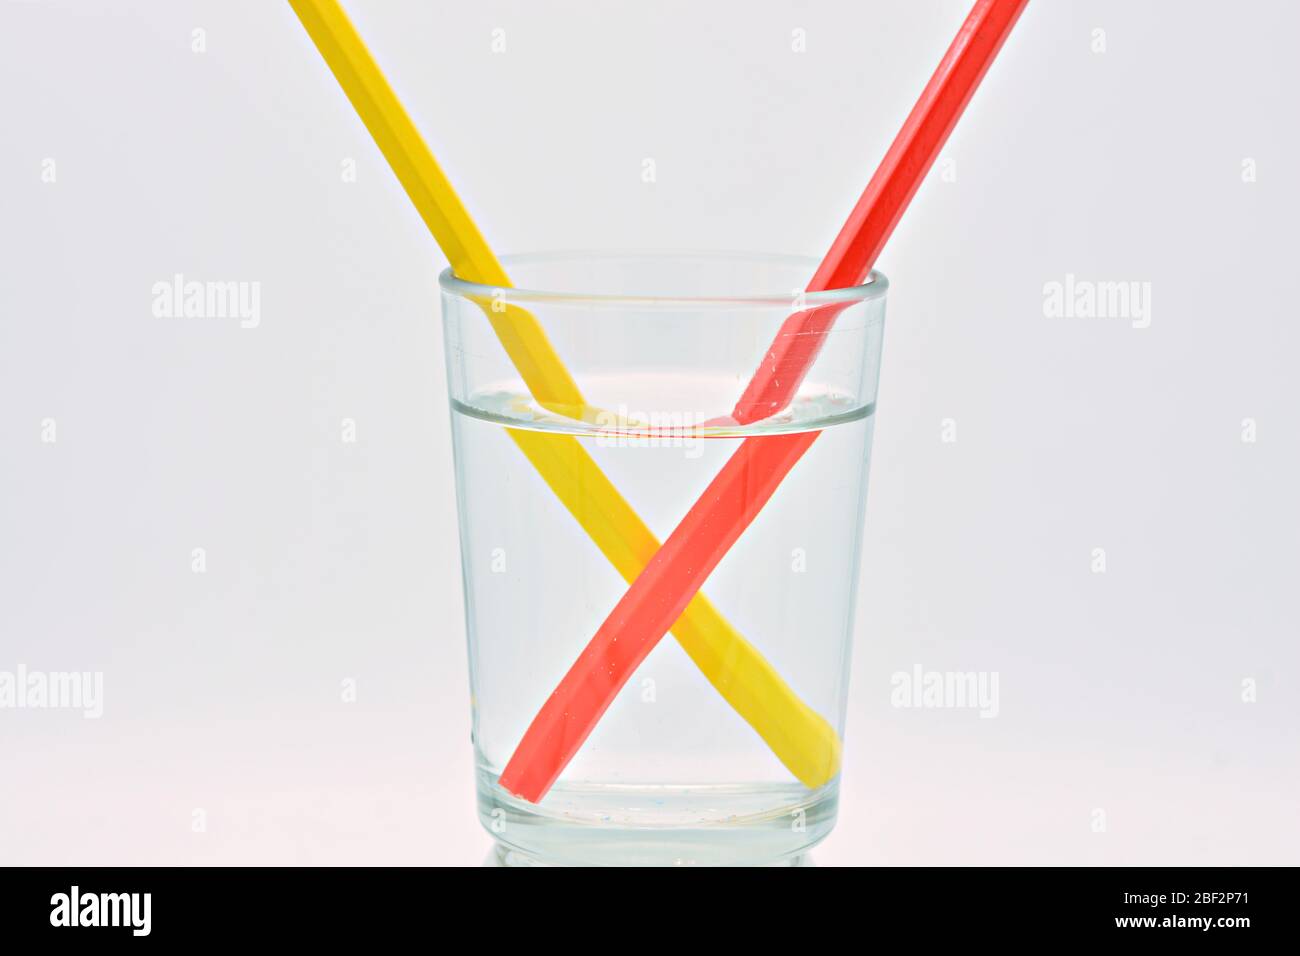 Yellow and red pencils, inside a glass filled with water, light refraction explanation Stock Photo